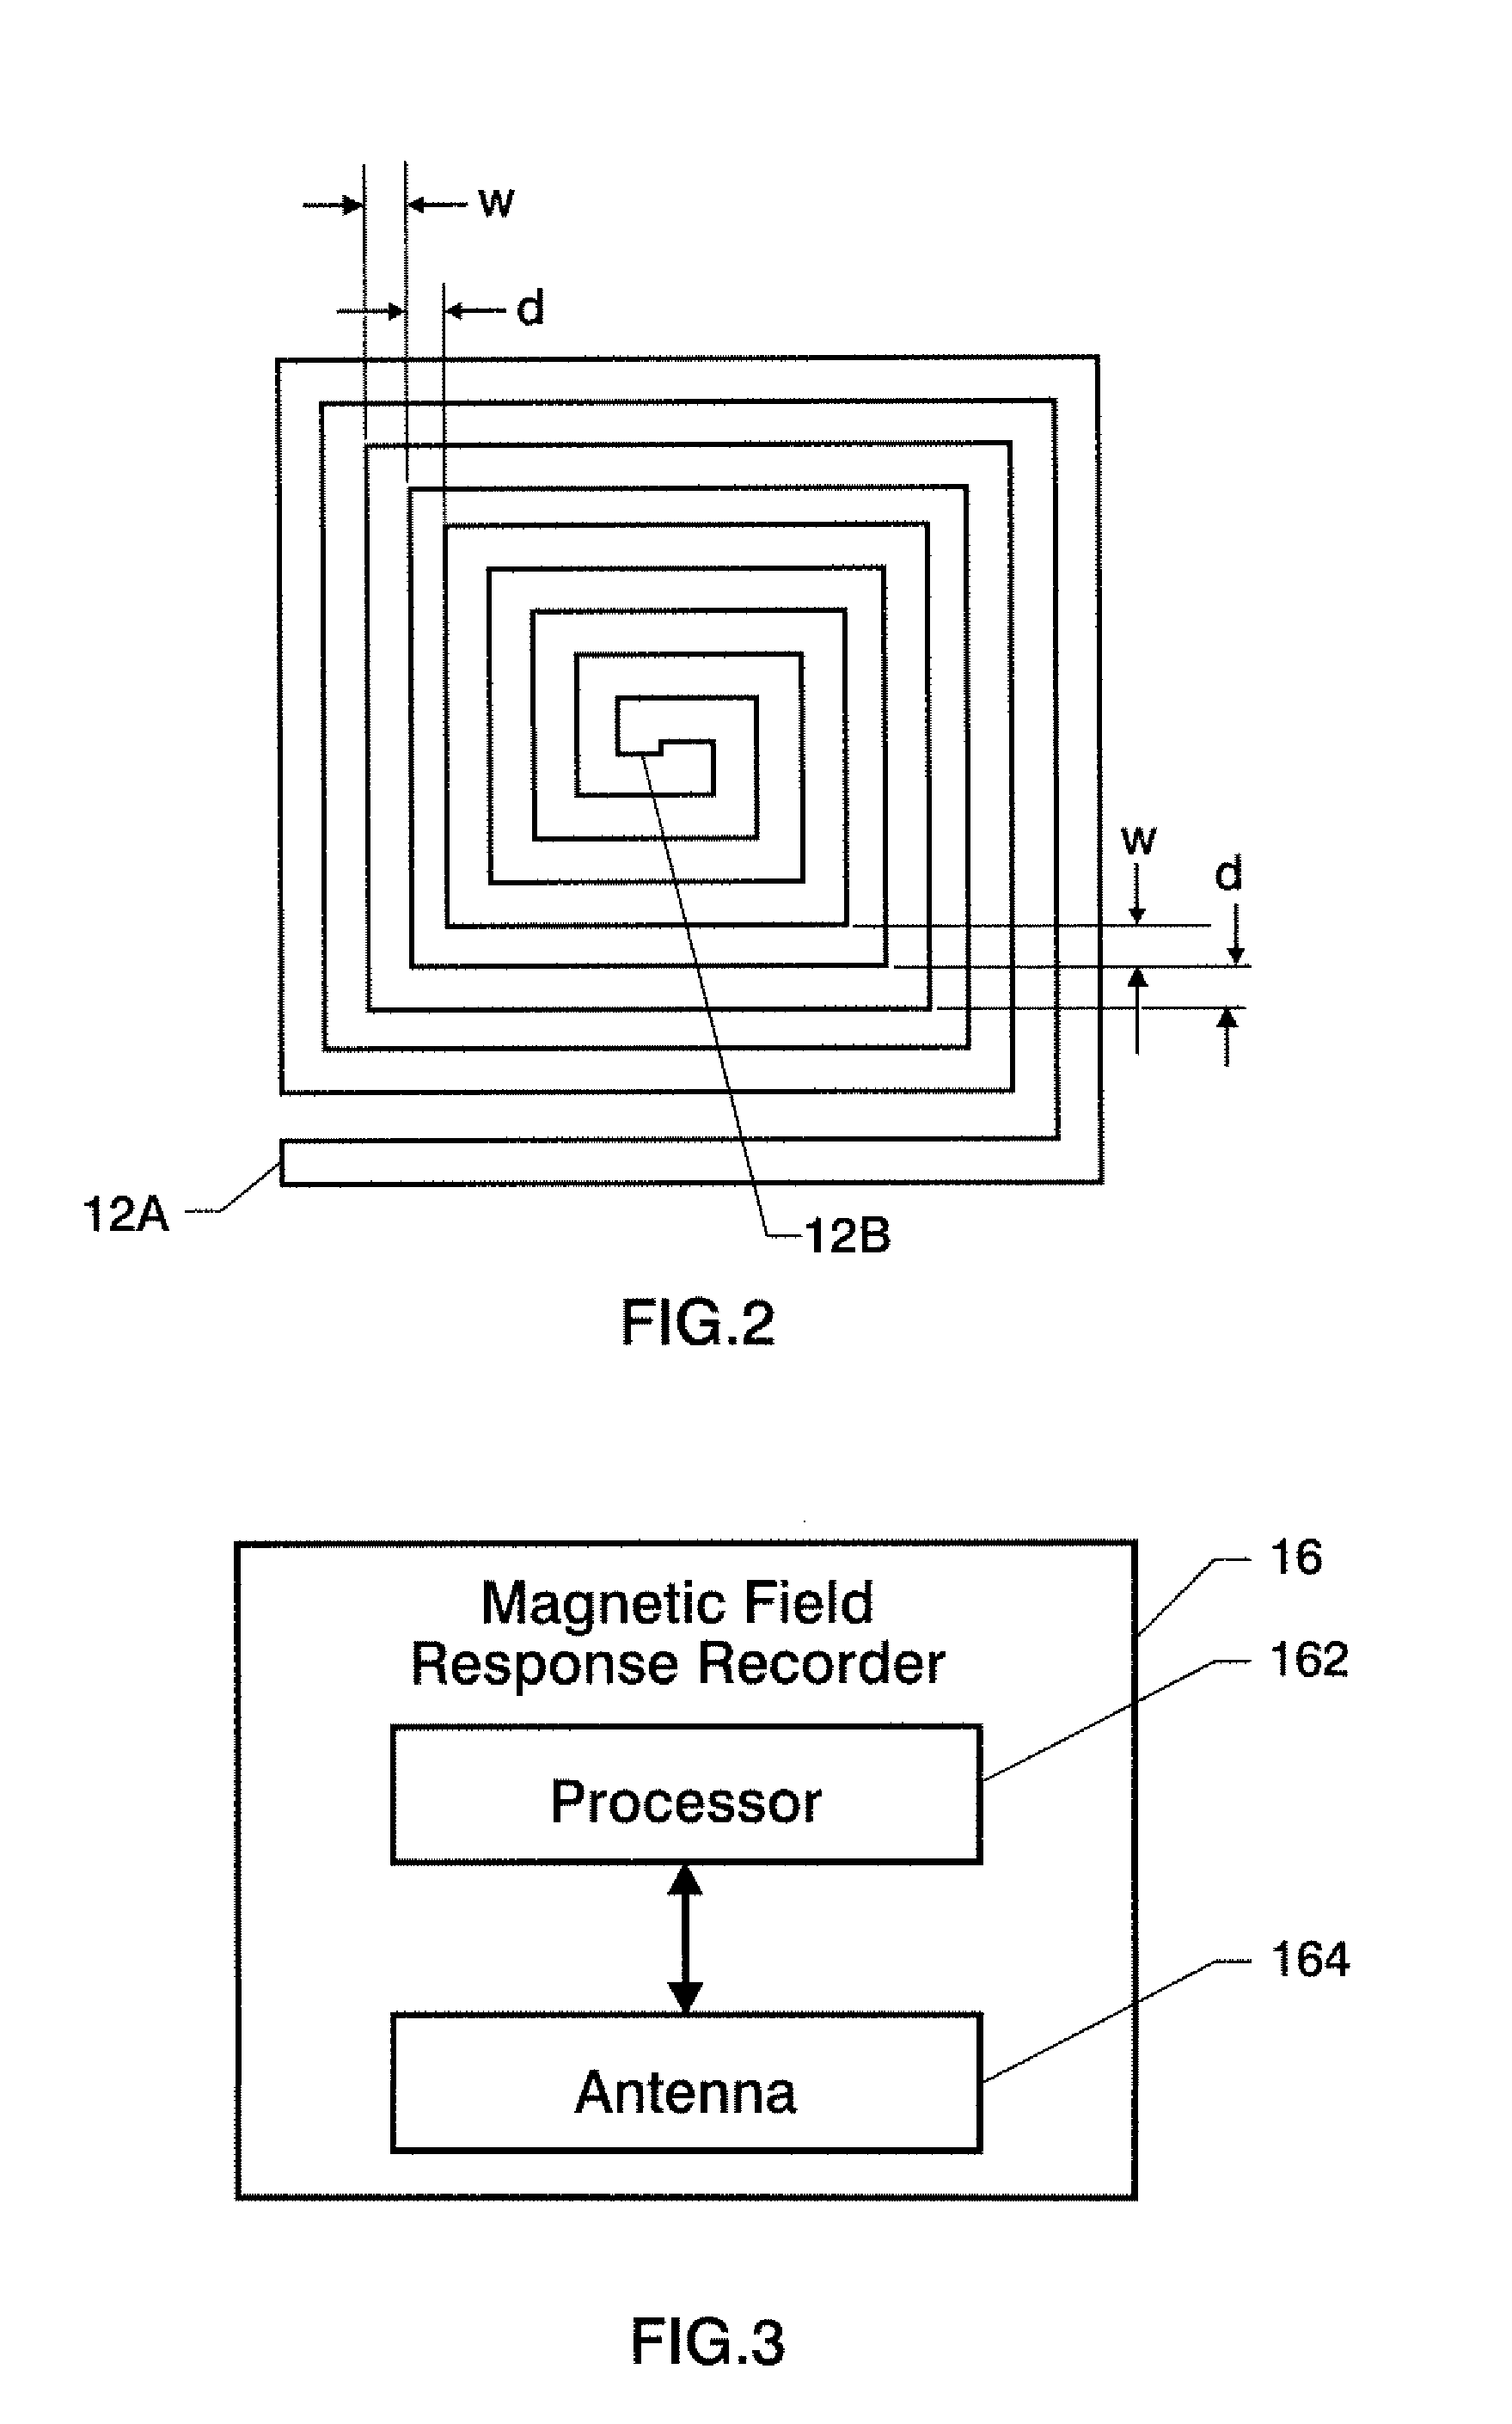 Wireless Sensing System for Non-Invasive Monitoring of Attributes of Contents in a Container